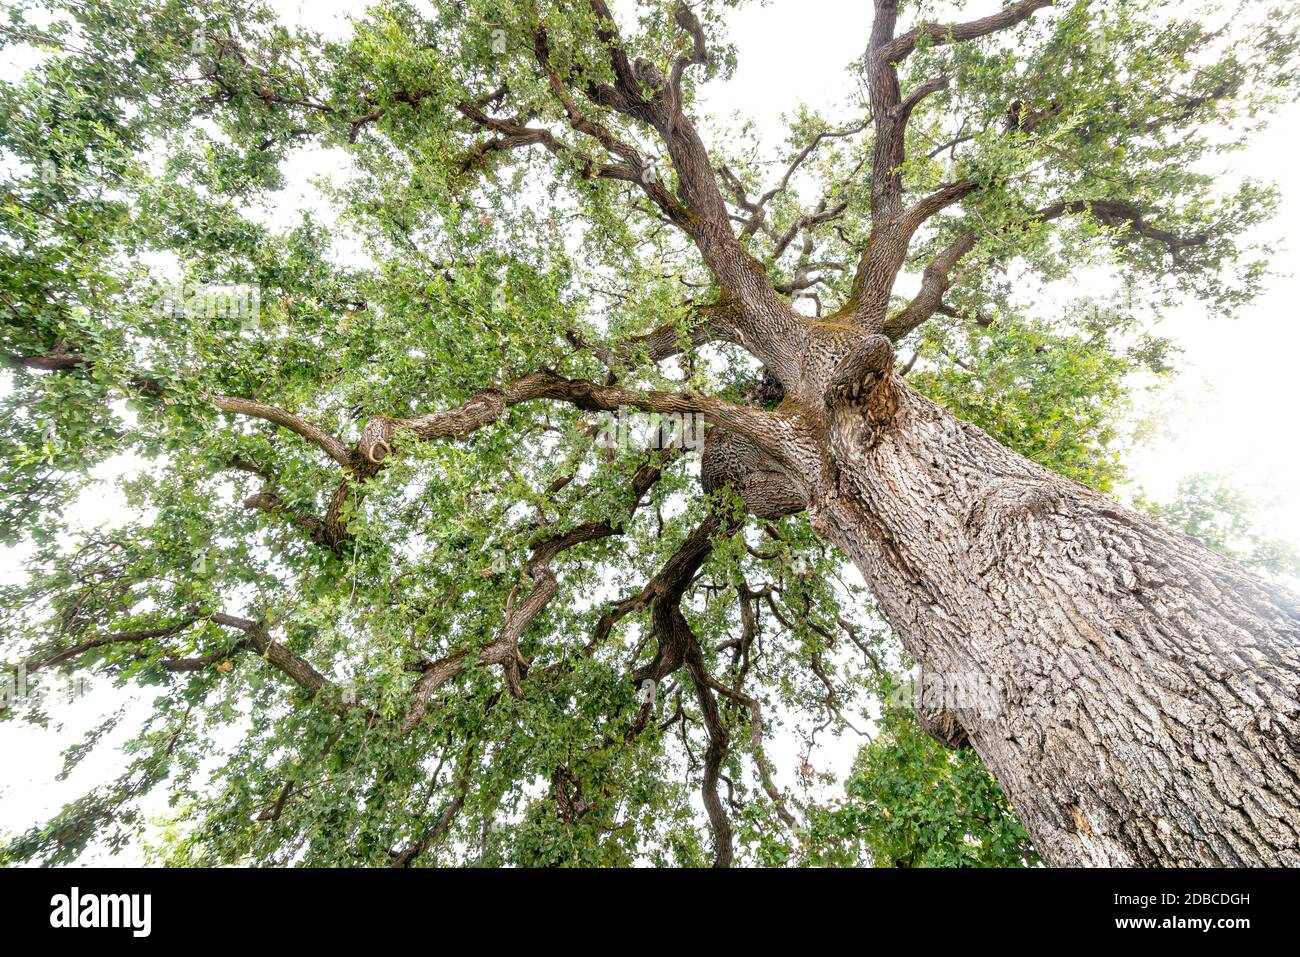 Majestic Californian valley oak or roble tree, estimated 500 years old Stock Photo